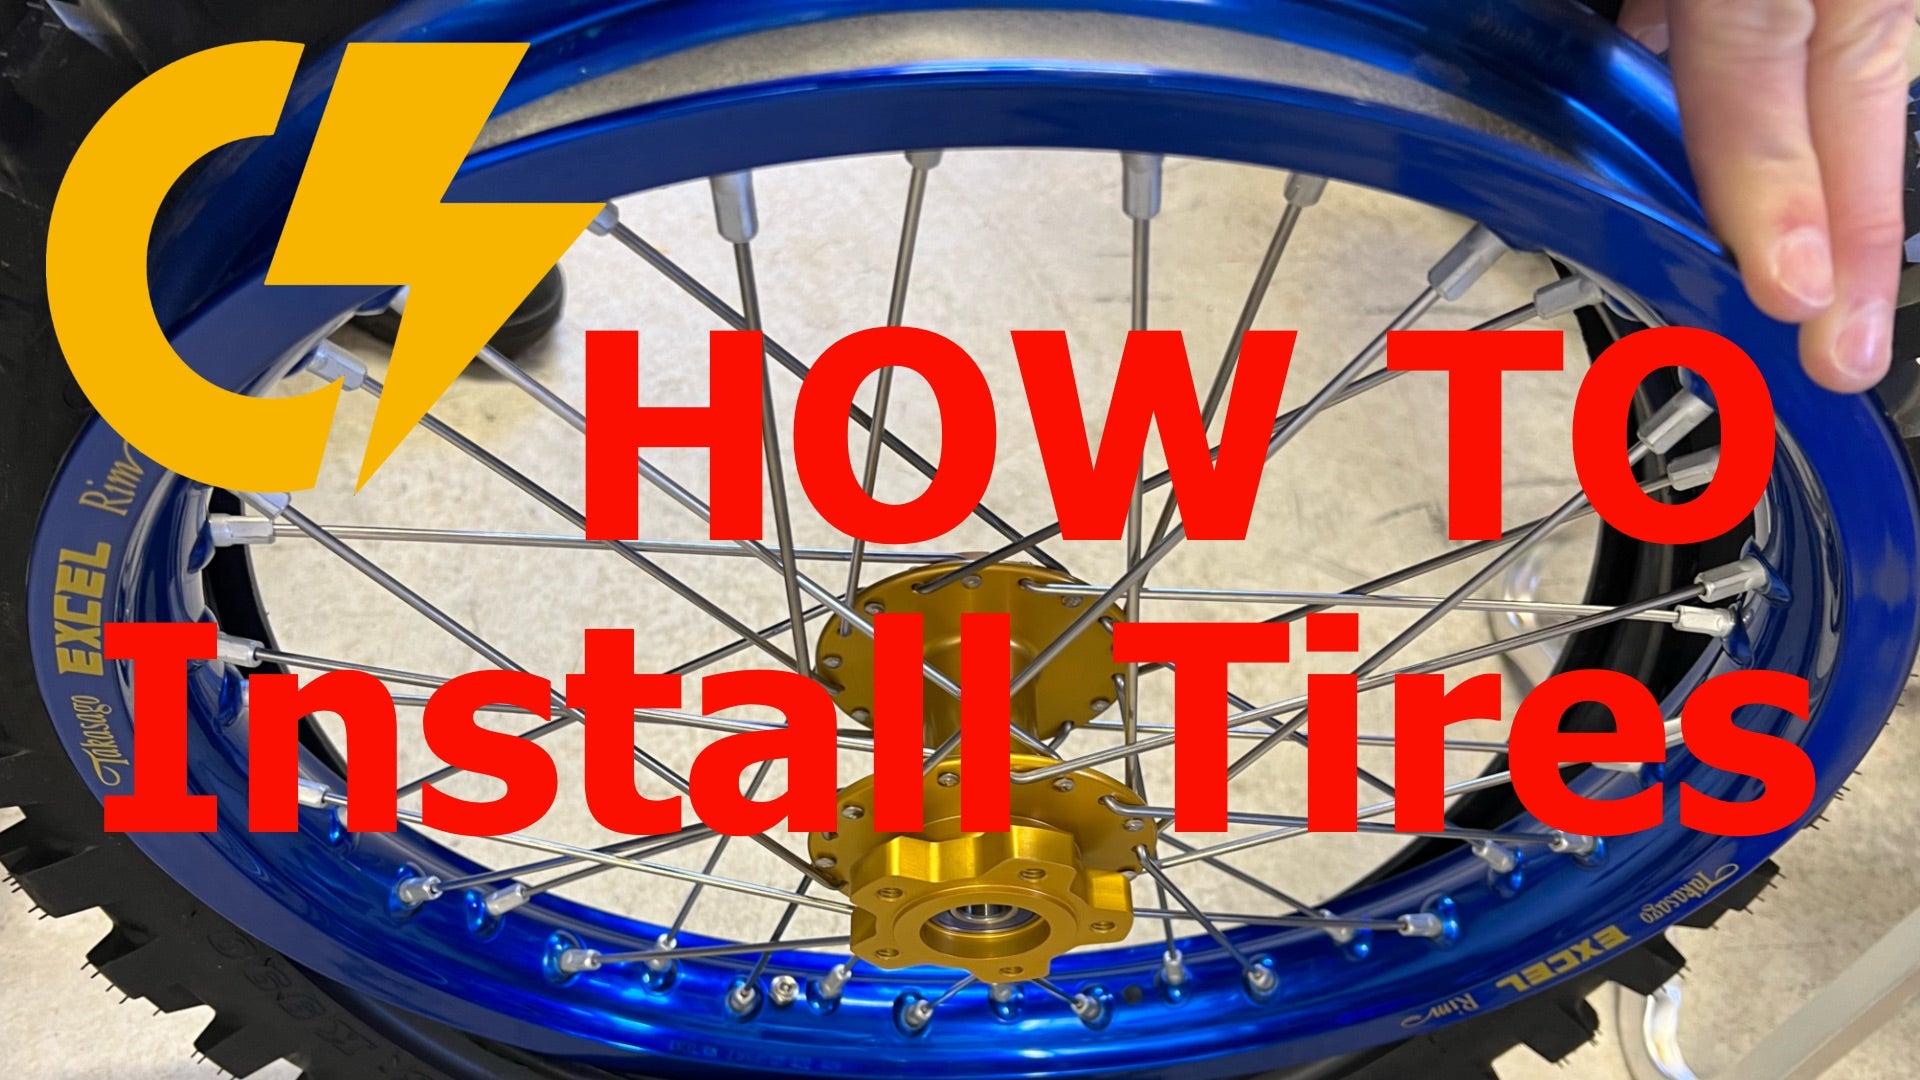 How to change a tire on Surron, Segway, eMoto, or other off road motorcycle